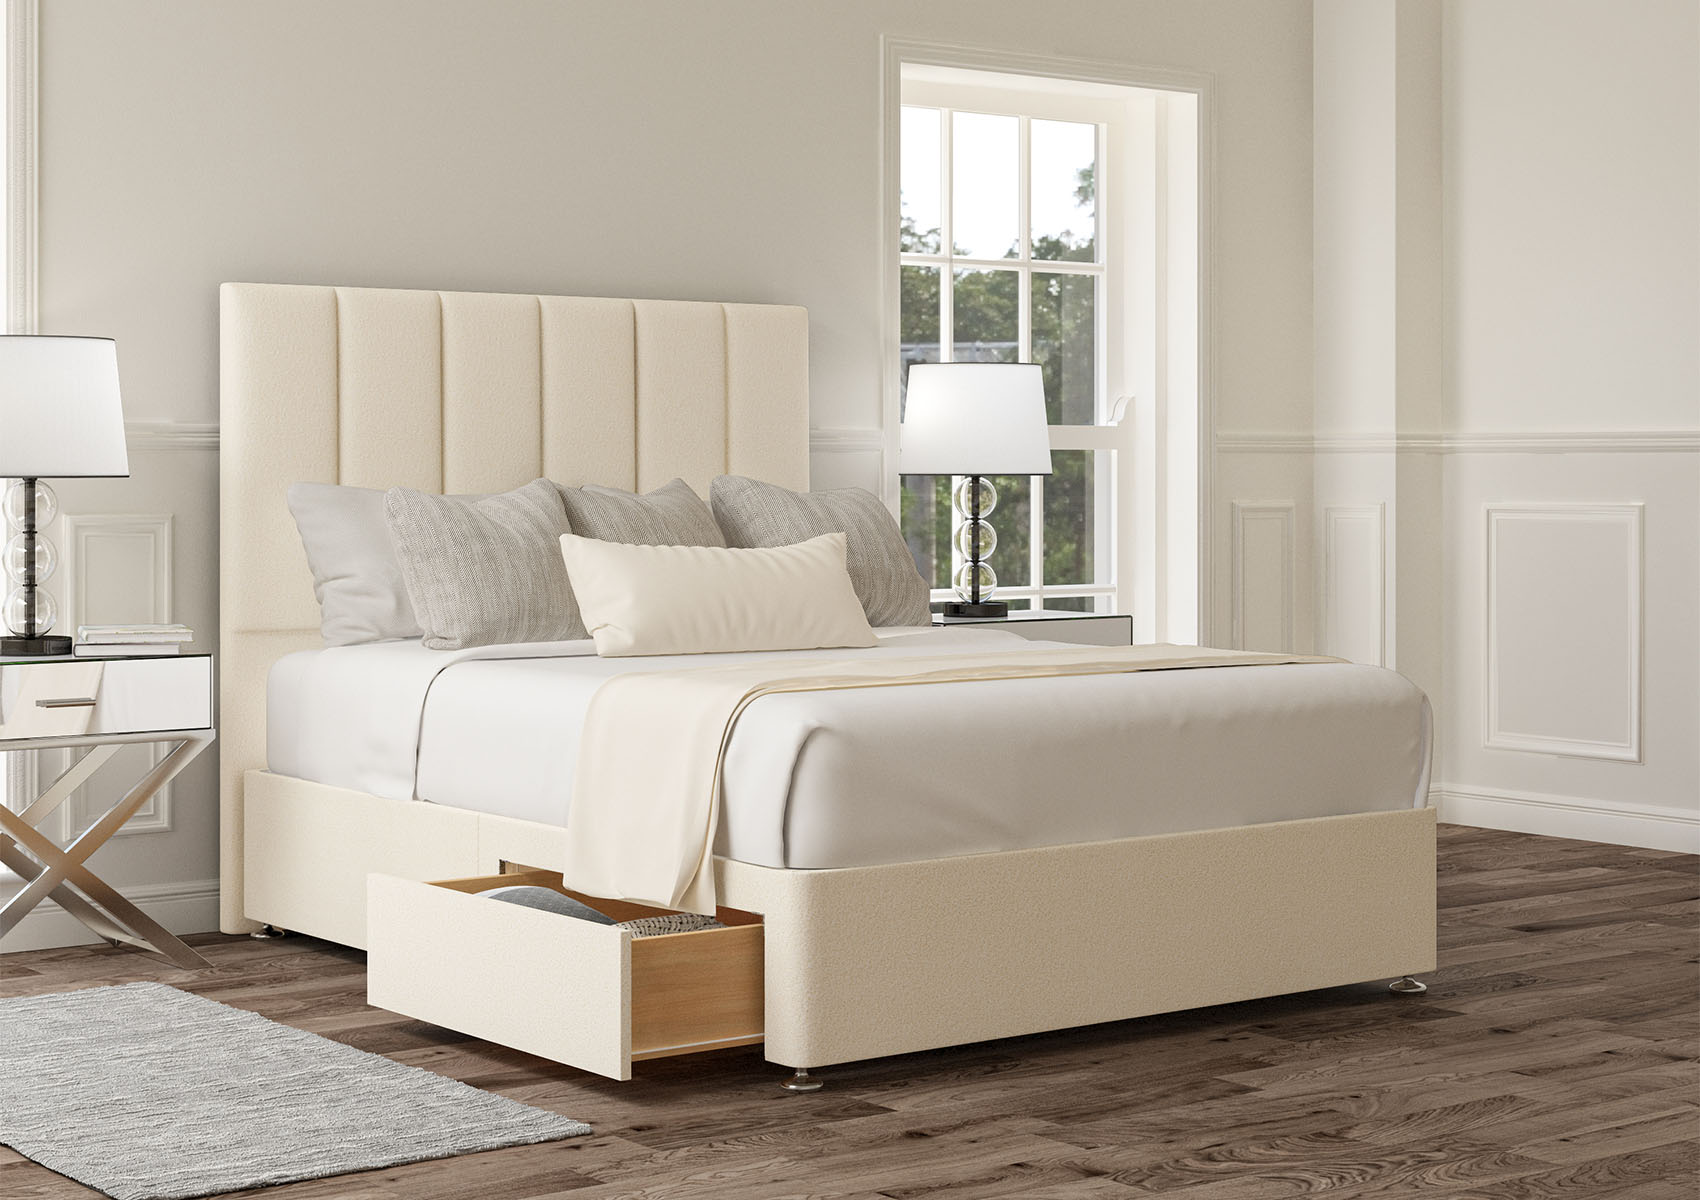 View Empire Carina Parchment Upholstered Super King Divan Bed Time4Sleep information